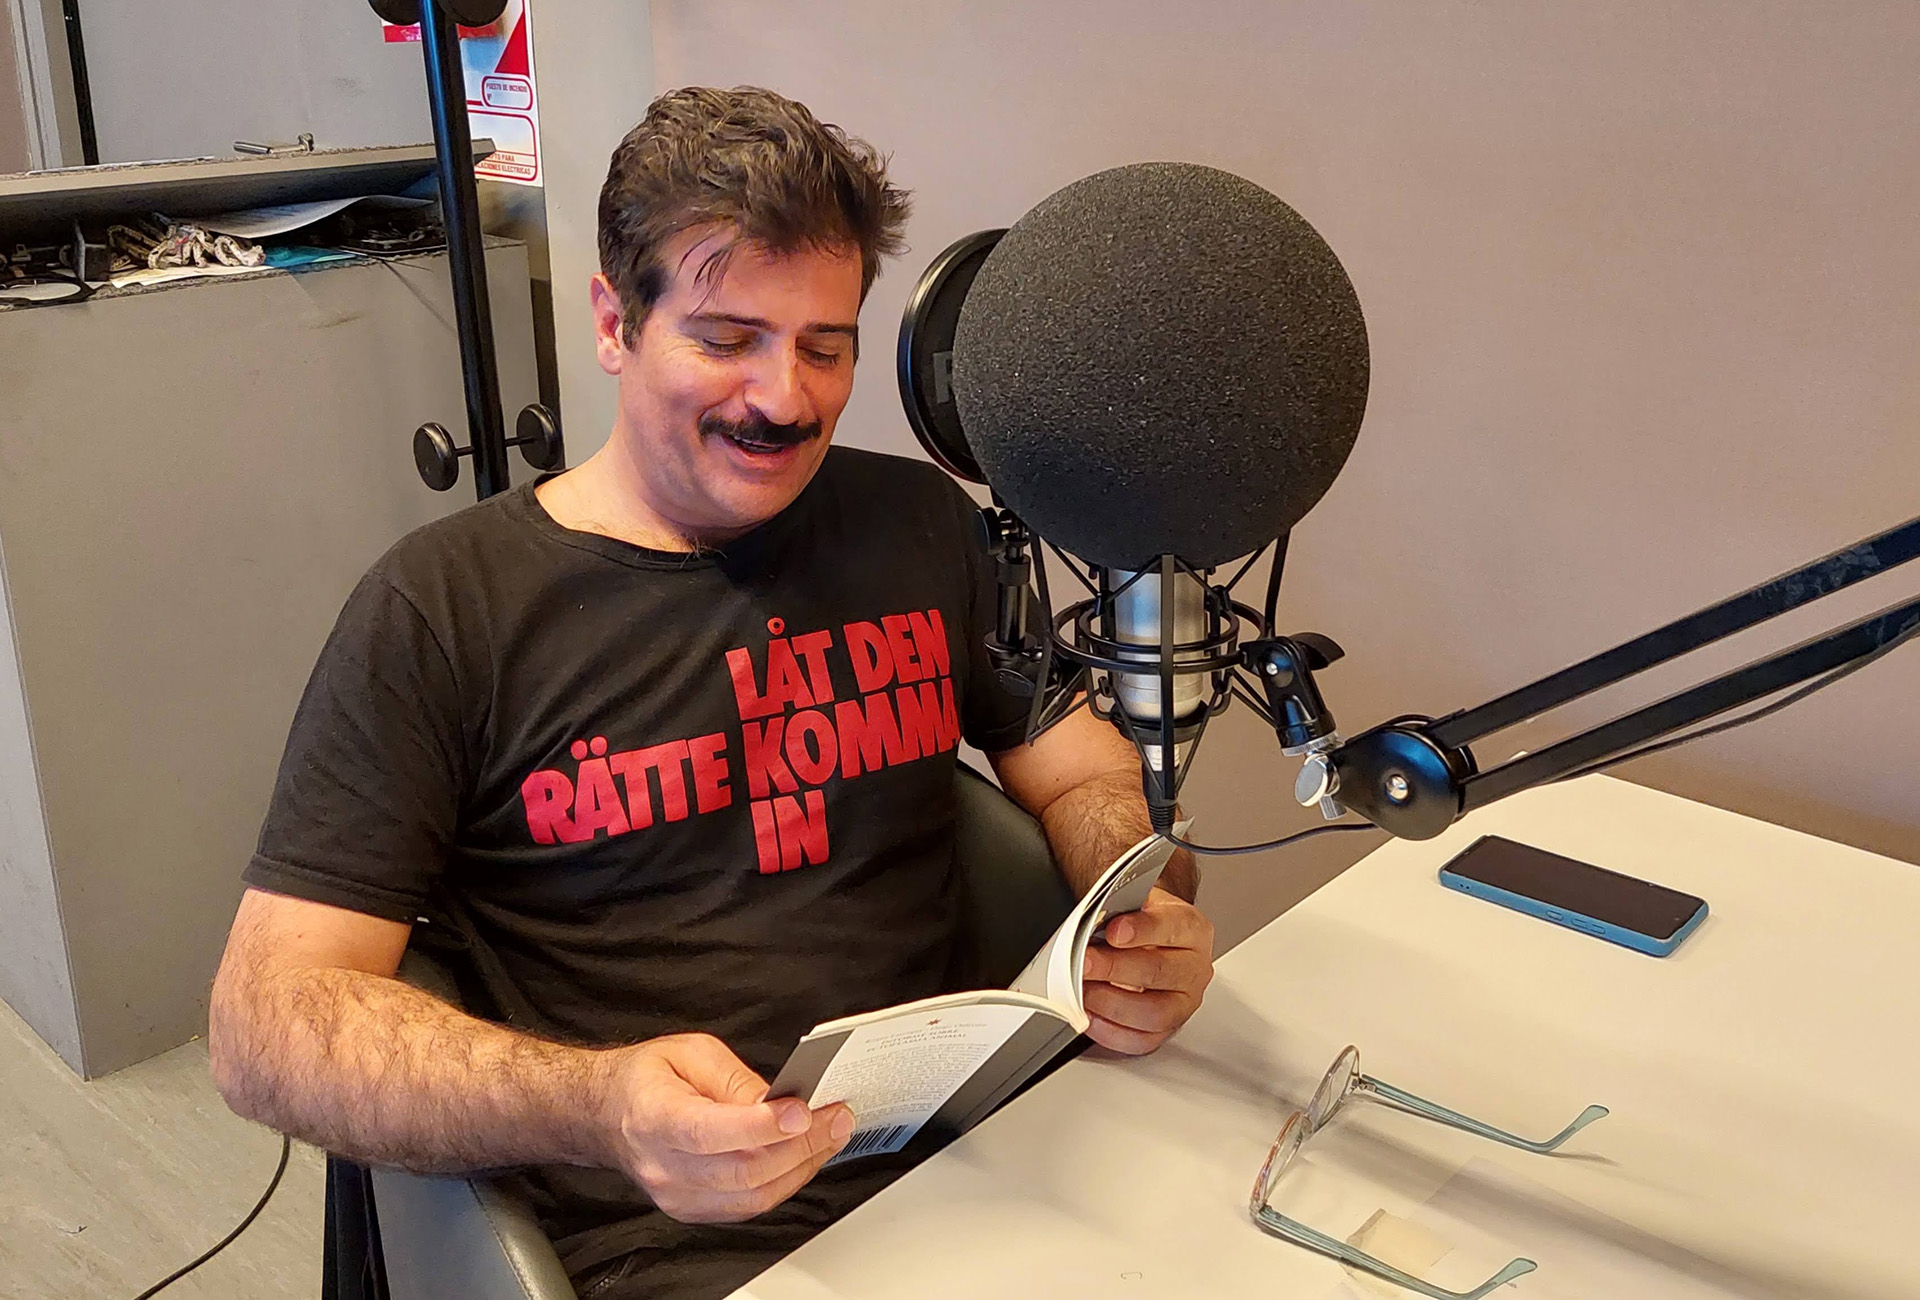 Rafael Spregelburd recorded stories by Roque Larraquy in the Infobae studios for the podcast "the ear that reads" by Patricia Kolesnicov.